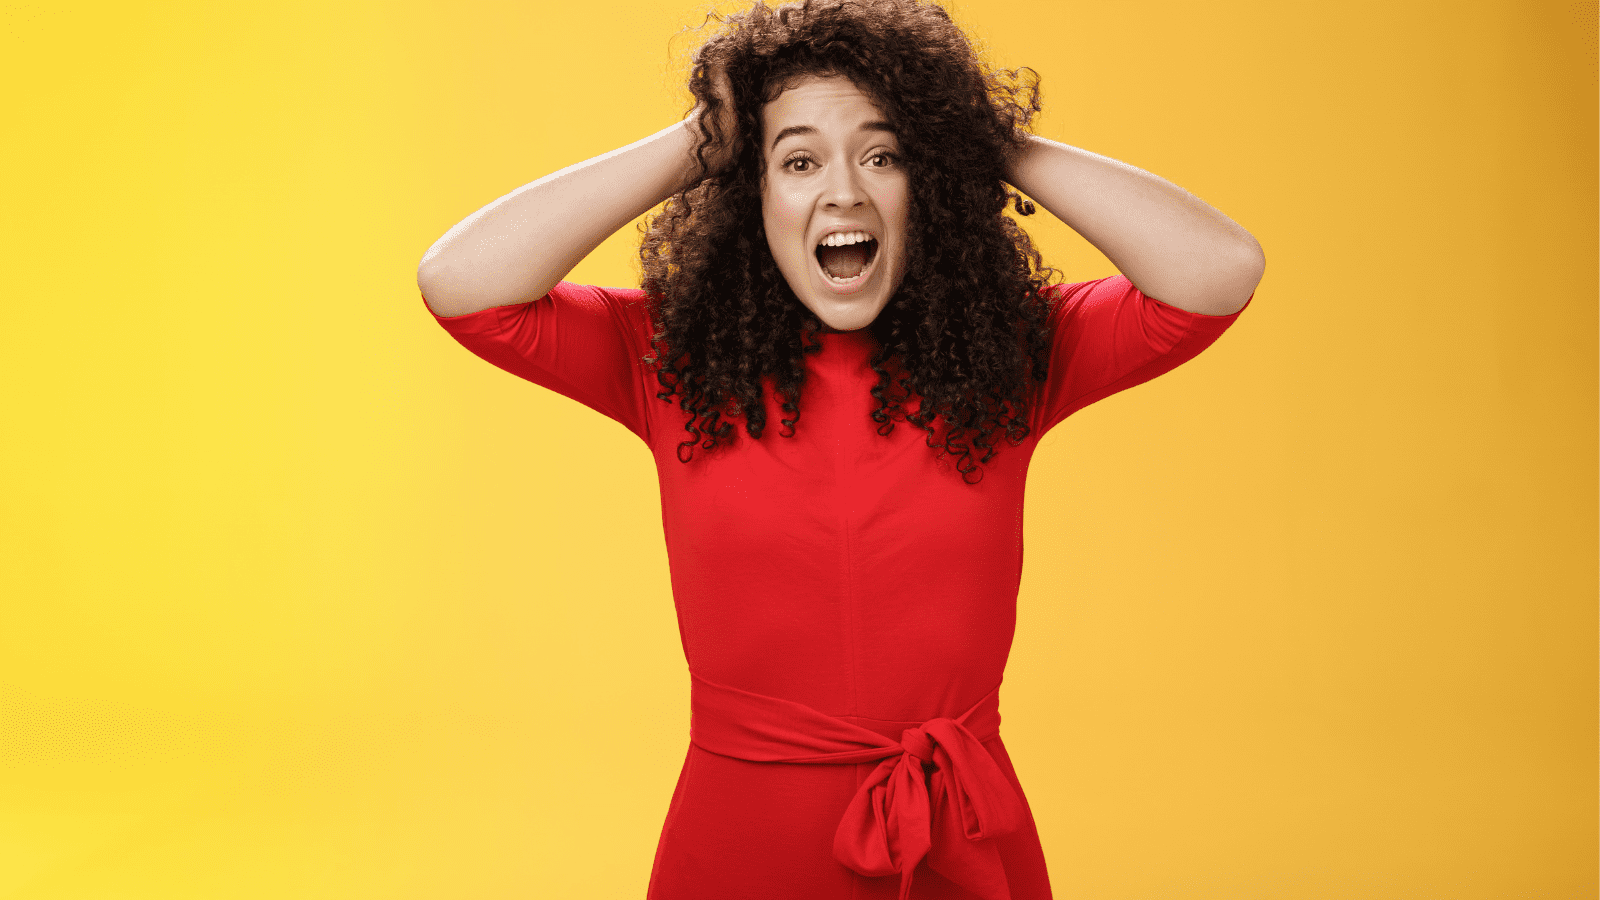 Girl Feeling Pressure Standing Anxious in Panic Holding Hands on Curly Hair Yelling at Camera Disturbed, Freaked Out Being Tensed and Upset with Bad Situation, Standing Troubled over Yellow Background